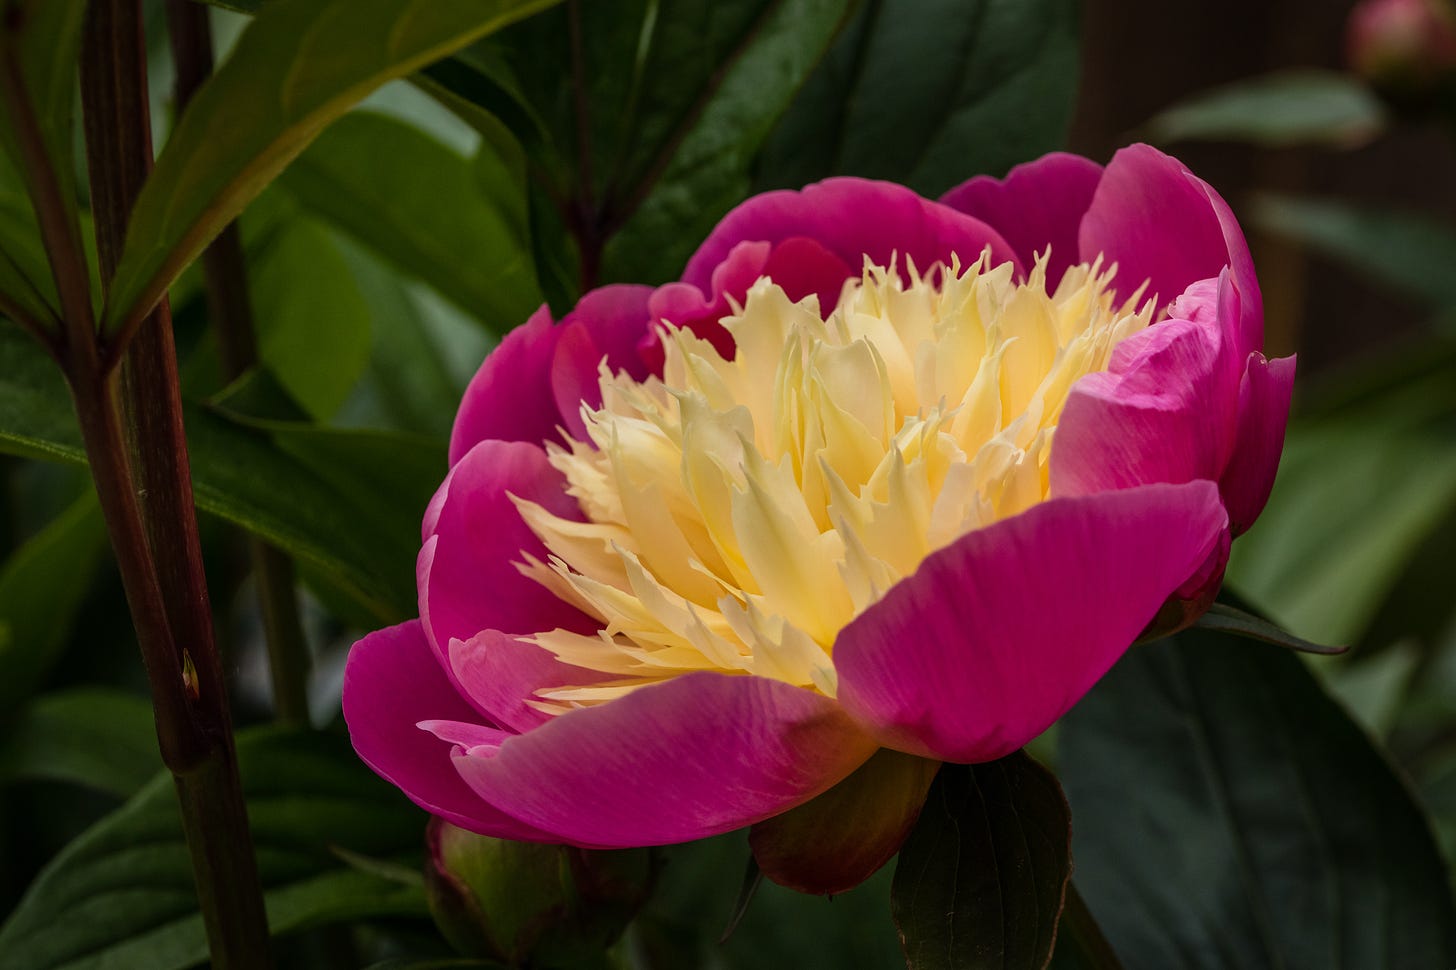 A photo of a blooming peony